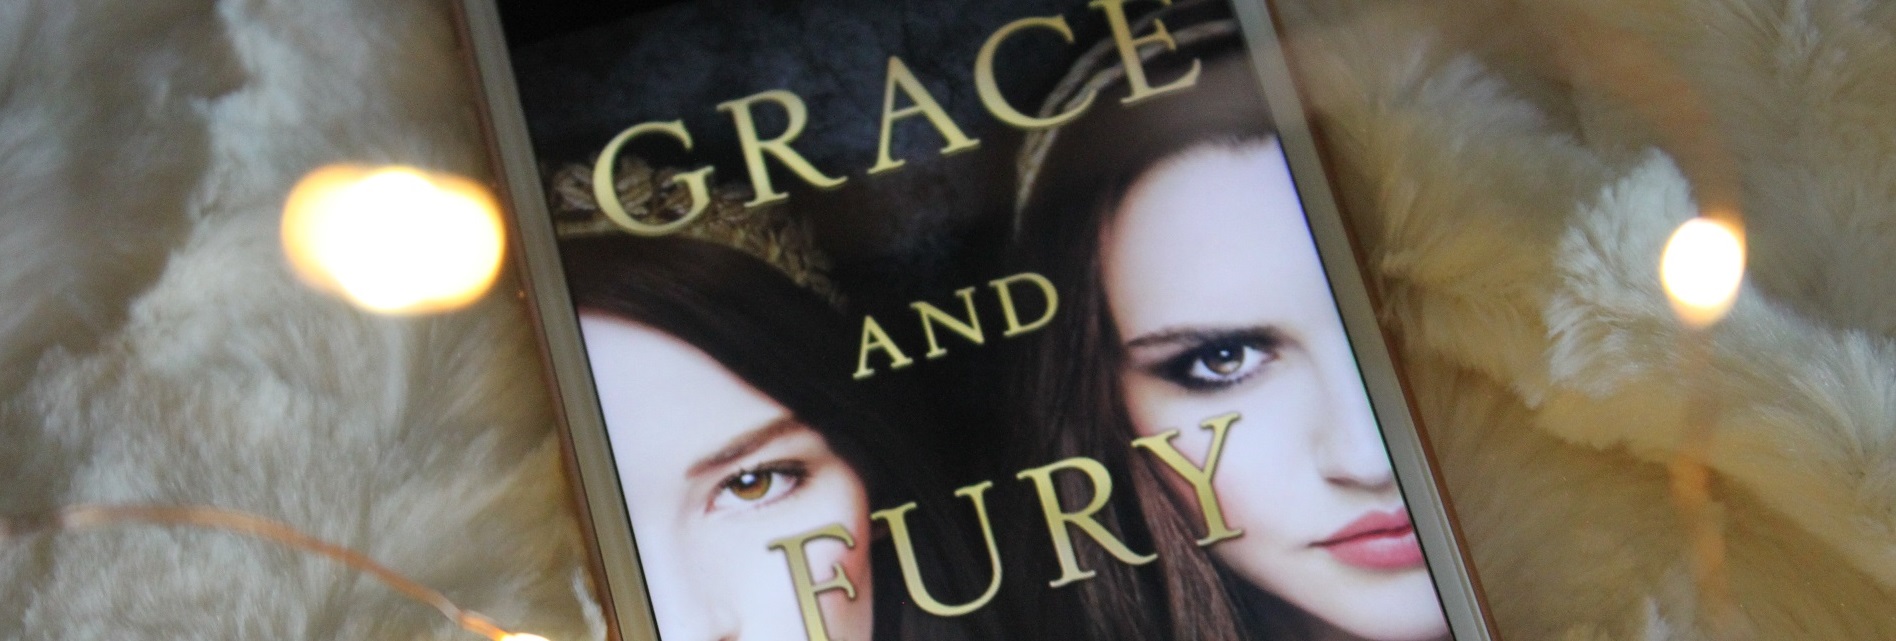 grace and fury tracy banghart